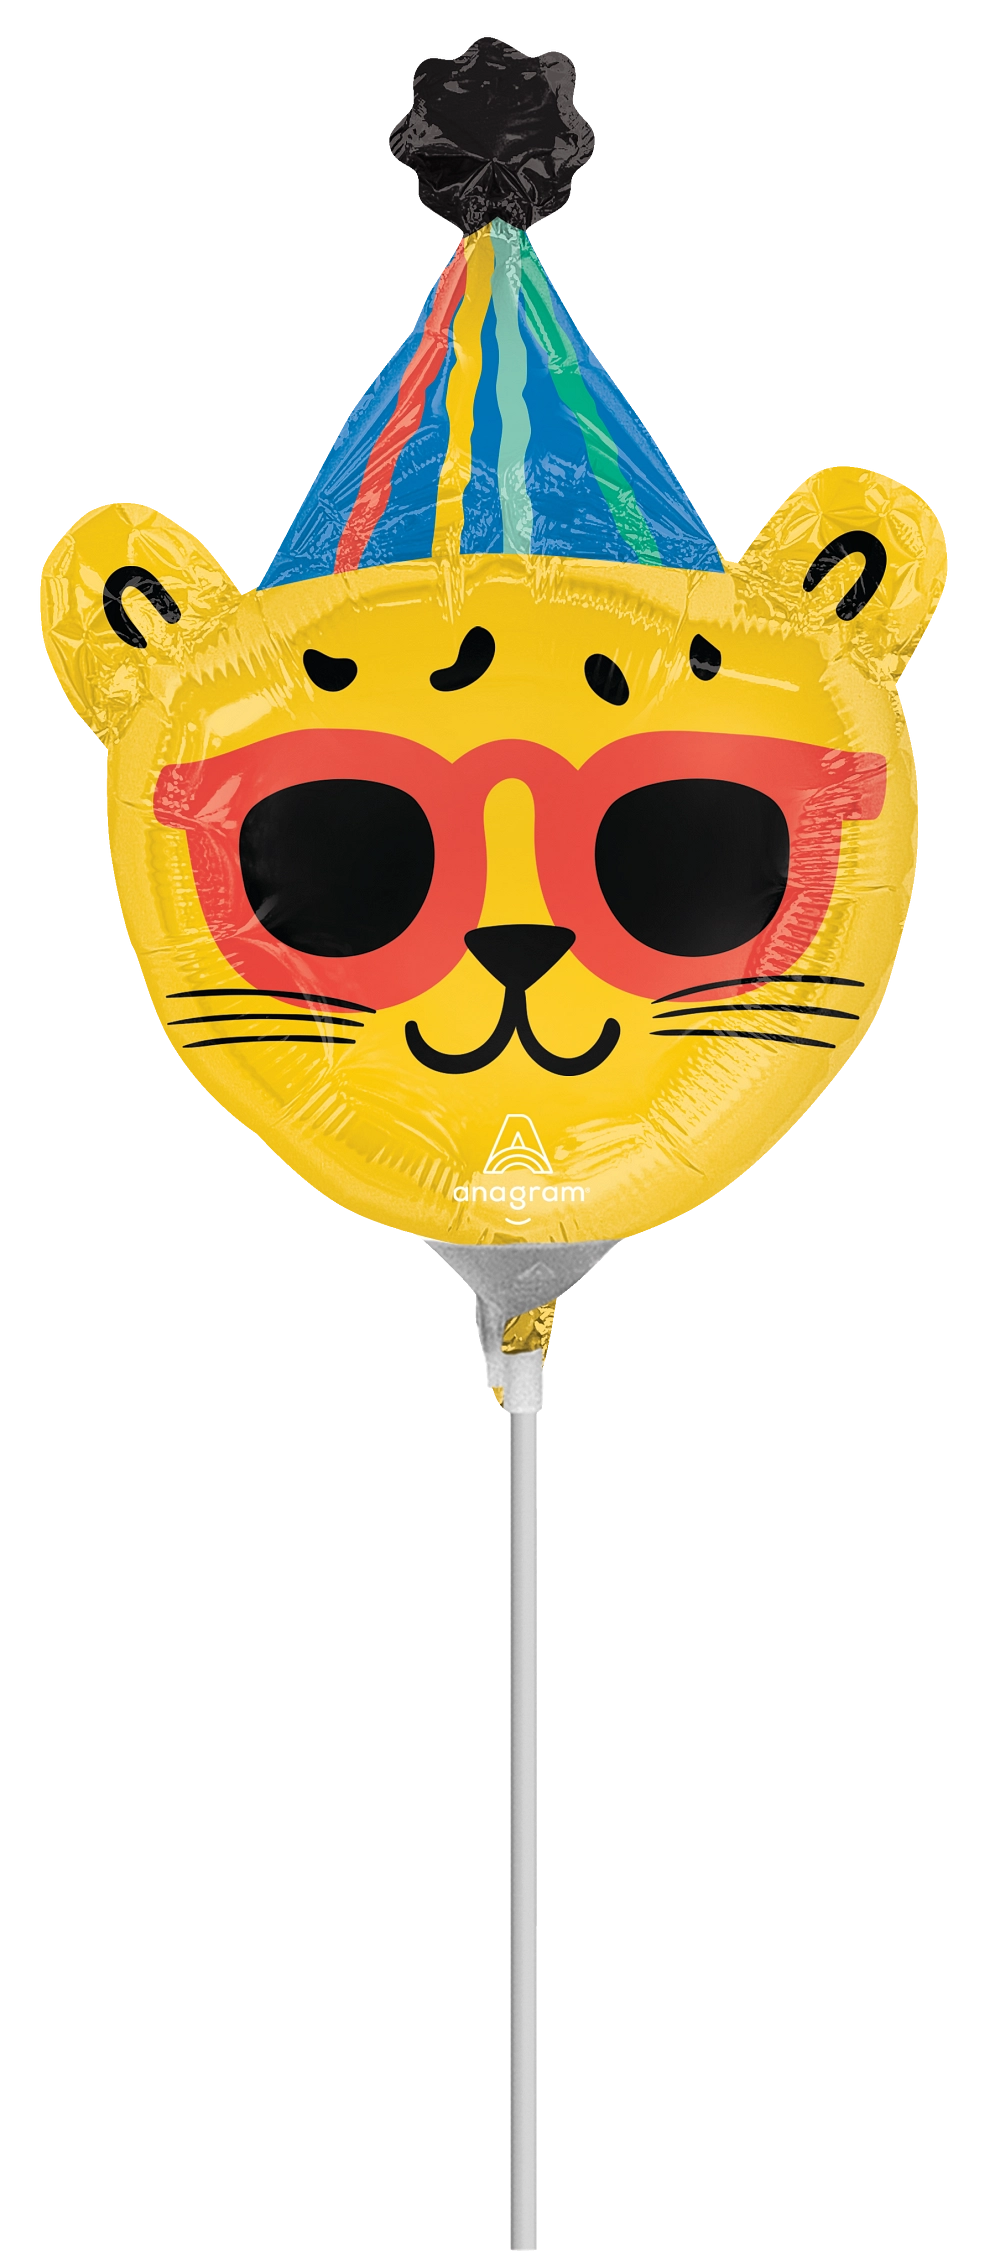 https://cdn.bargainballoons.com/products/2023-Bargain-Balloons/2023B/Large-Balloons/46348-Airfill-Only-Mini-Party-Animal-Leopard-Foil-balloons.webp